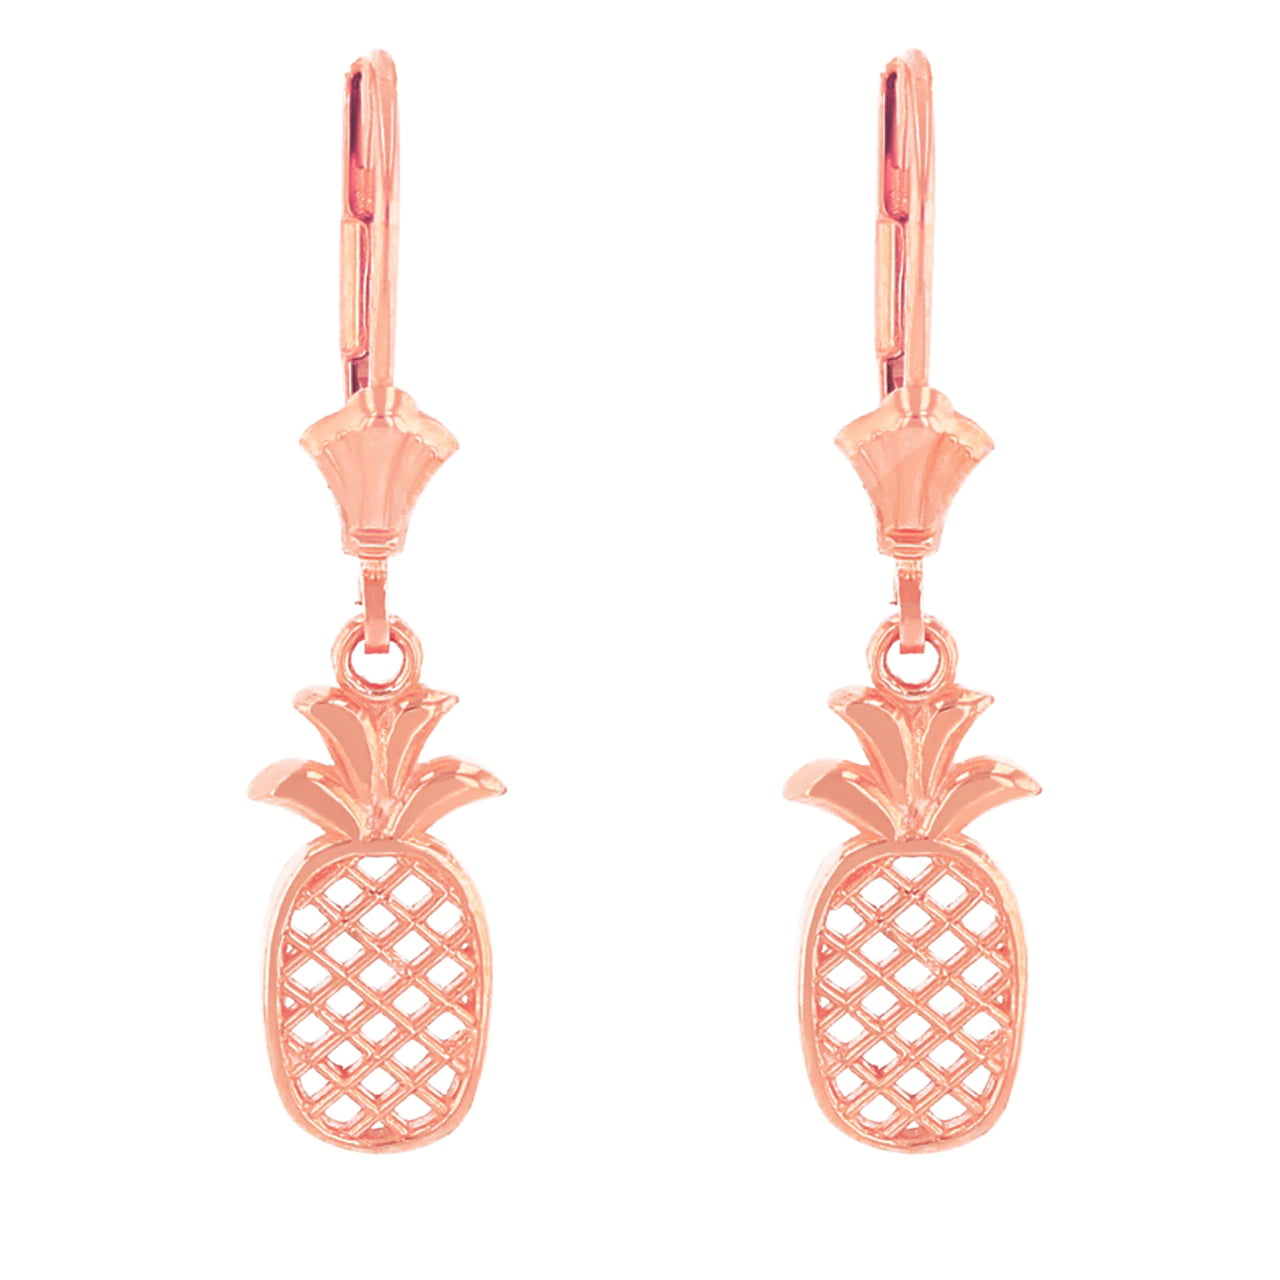 Details about   14k Rose Gold Pineapple Studs